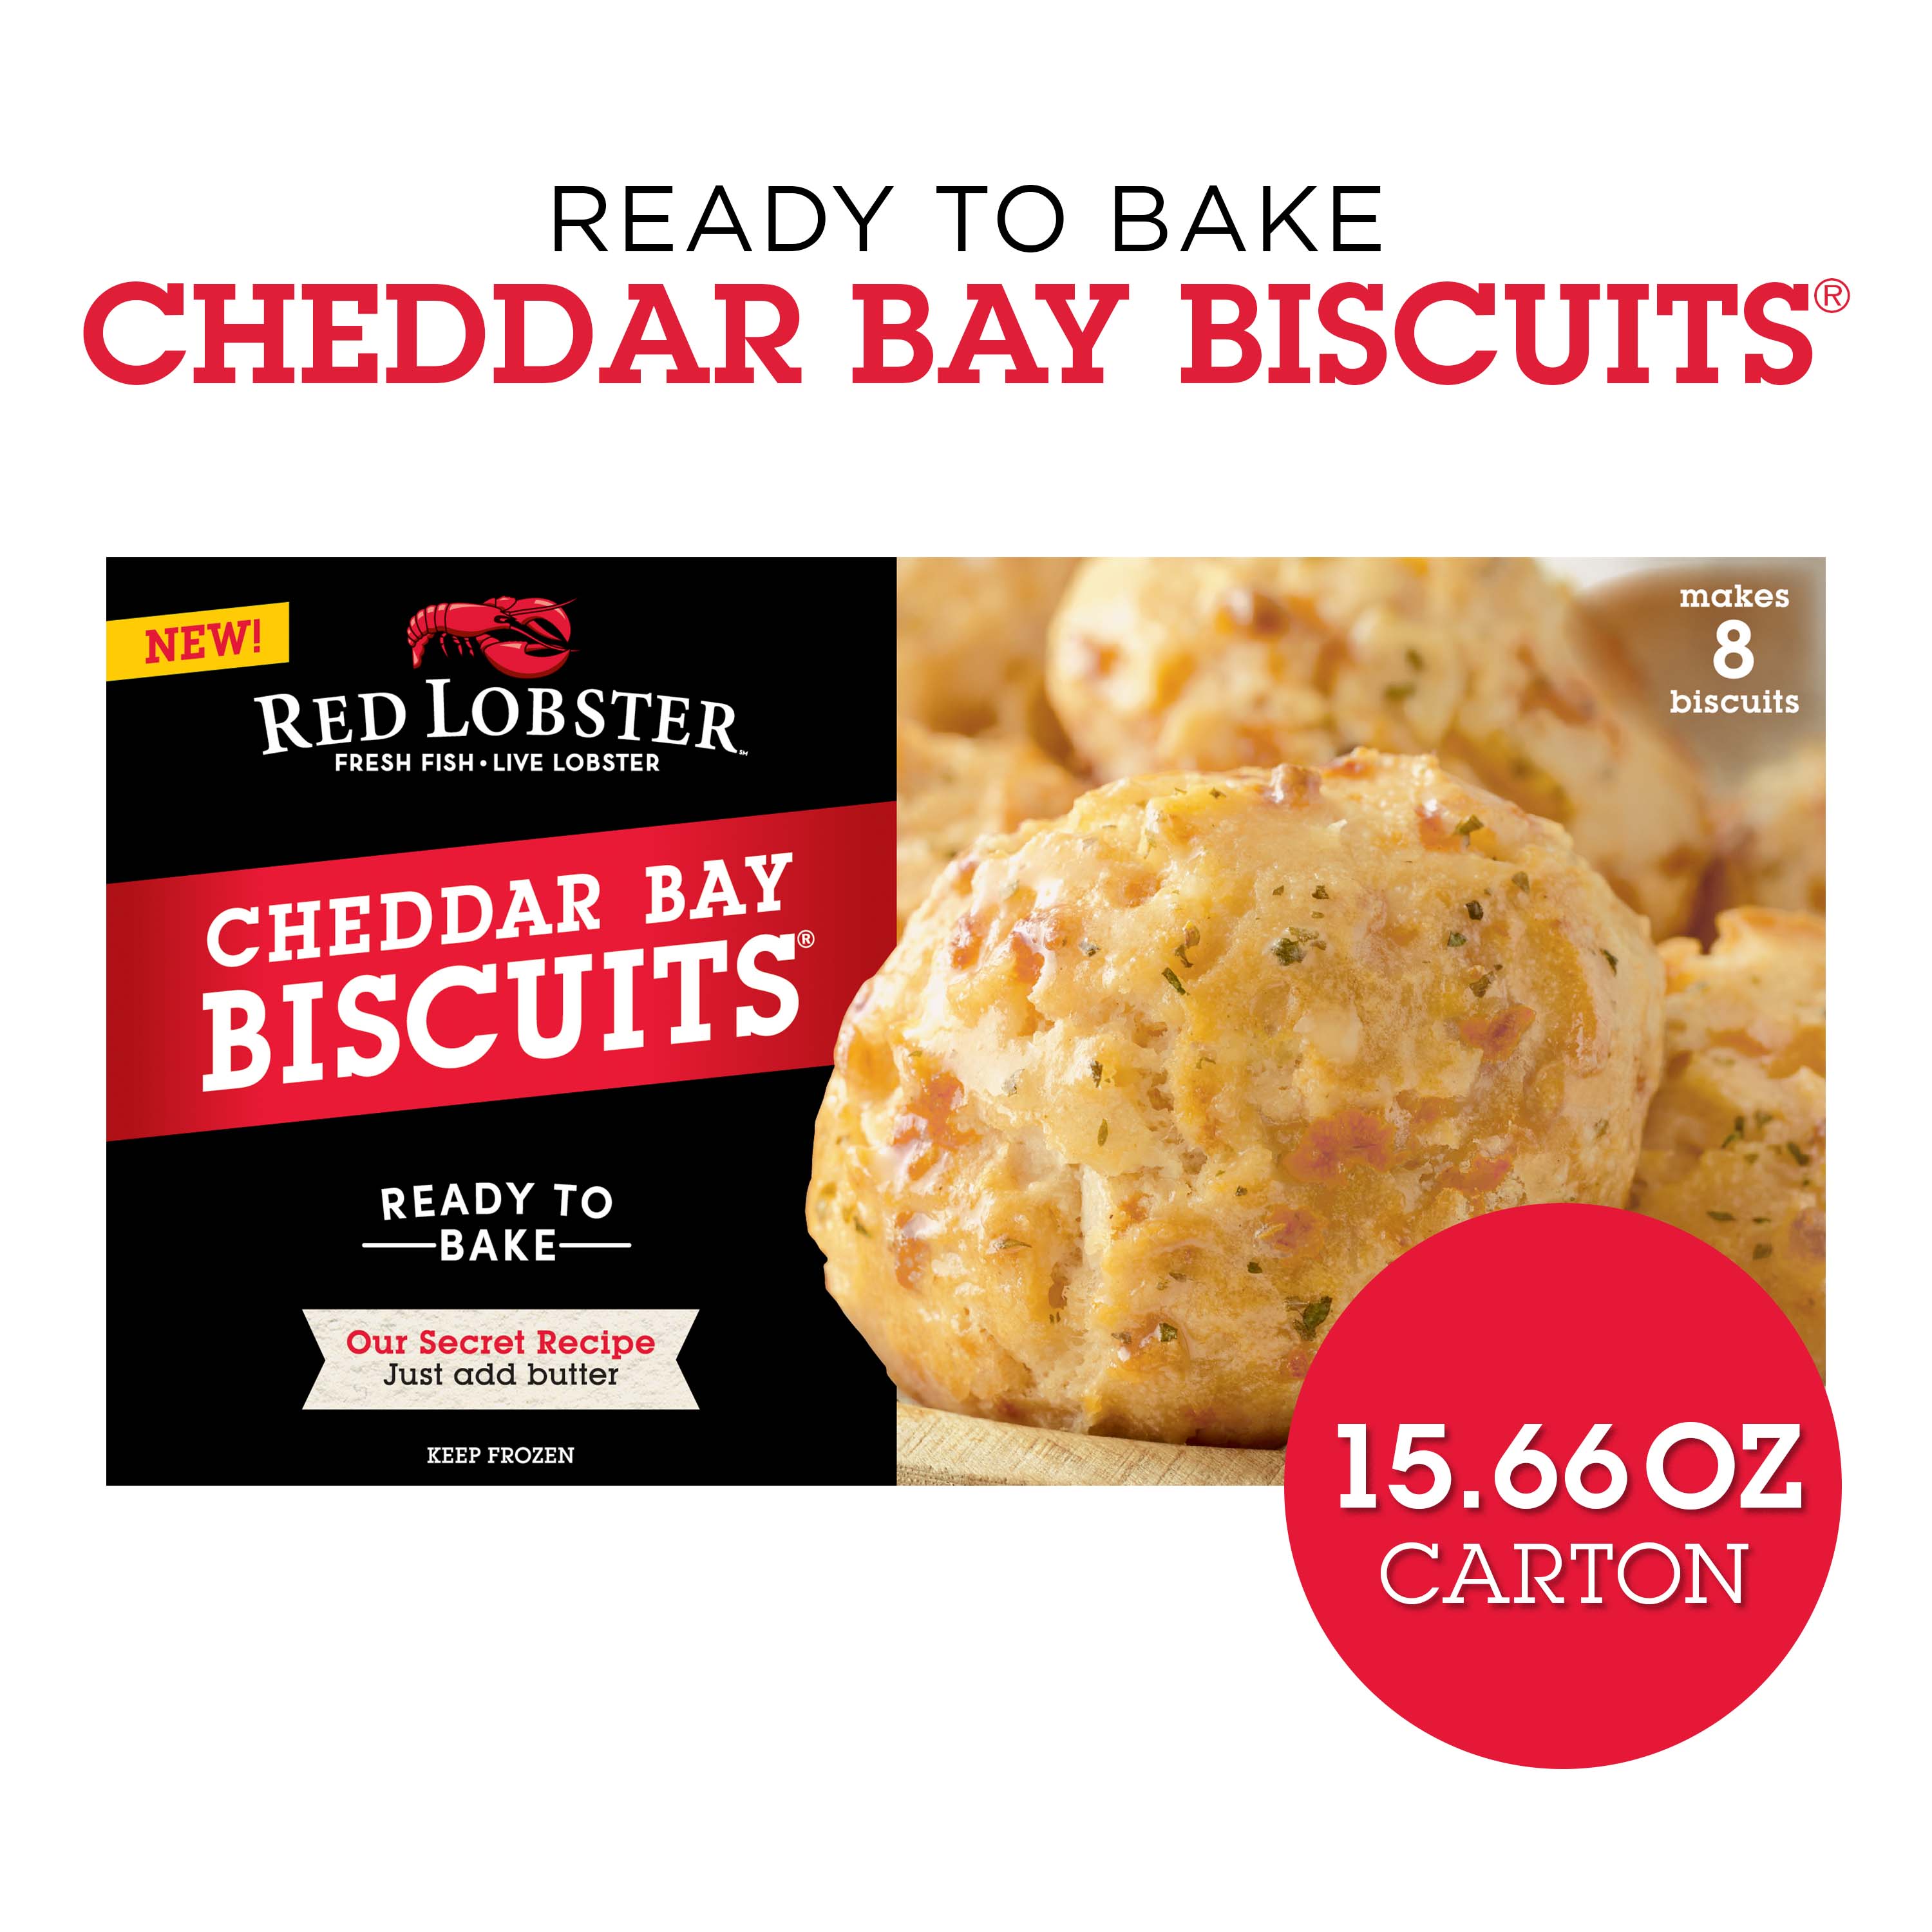 Red Lobster Cheddar Bay Frozen Biscuits, Ready to Bake, Makes 8 Biscuits, 15.66 oz Box - image 2 of 7